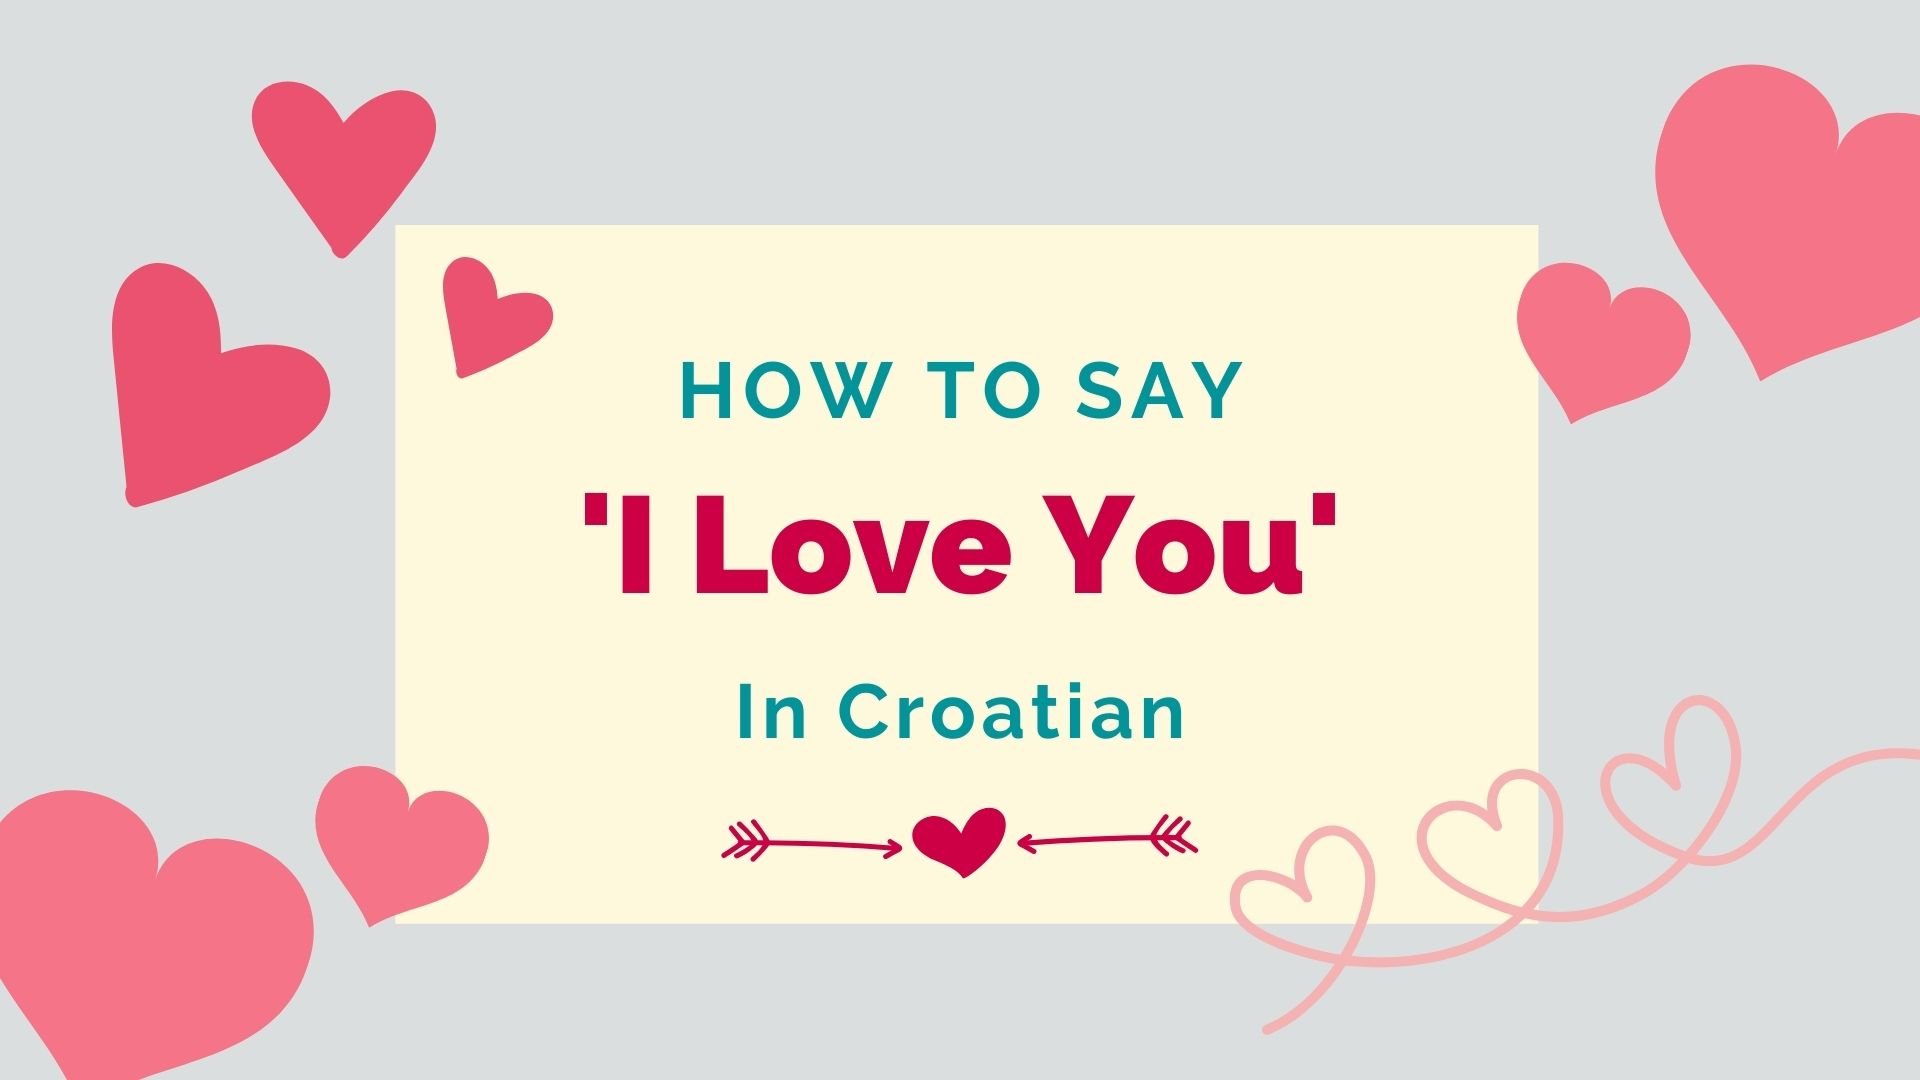 How To Say 'I Love You' In Croatian + Other Romantic Phrases - Lingalot